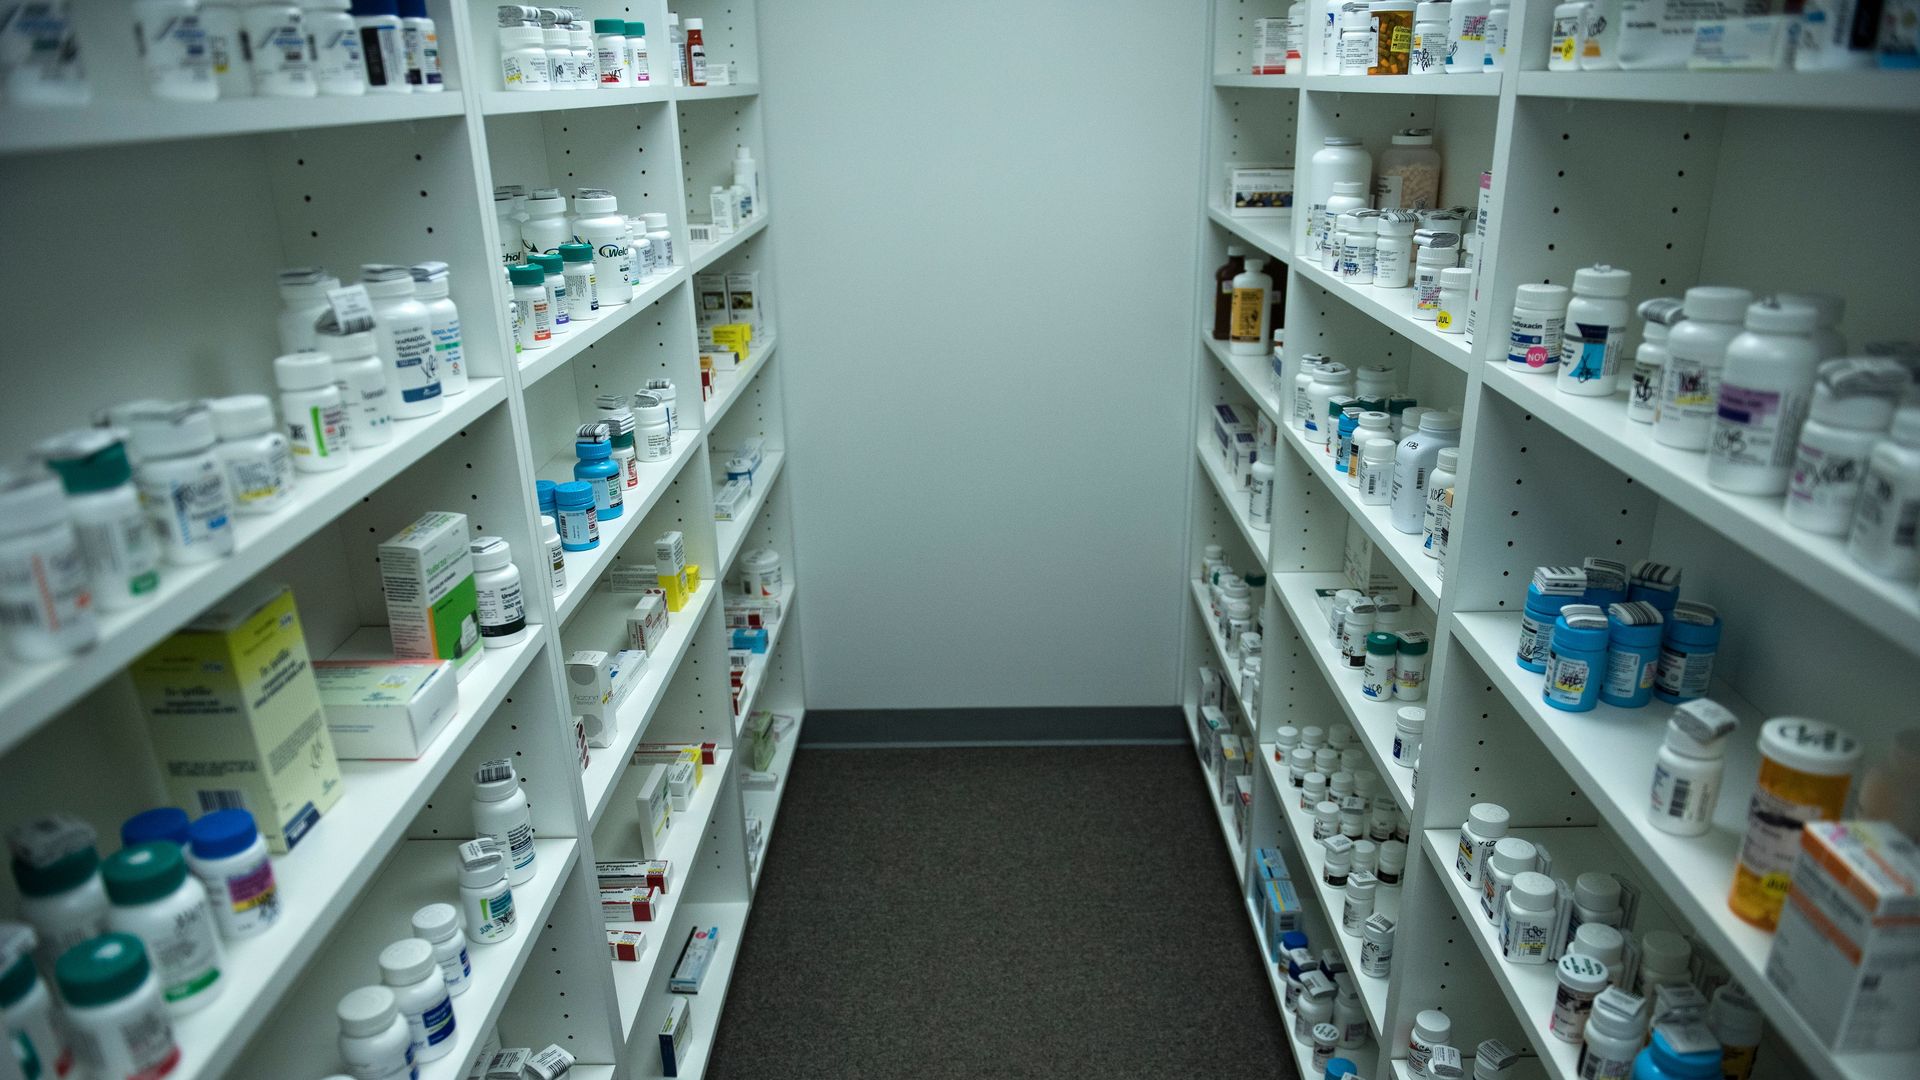 Shelves in a pharmacy are stocked with prescription drugs.